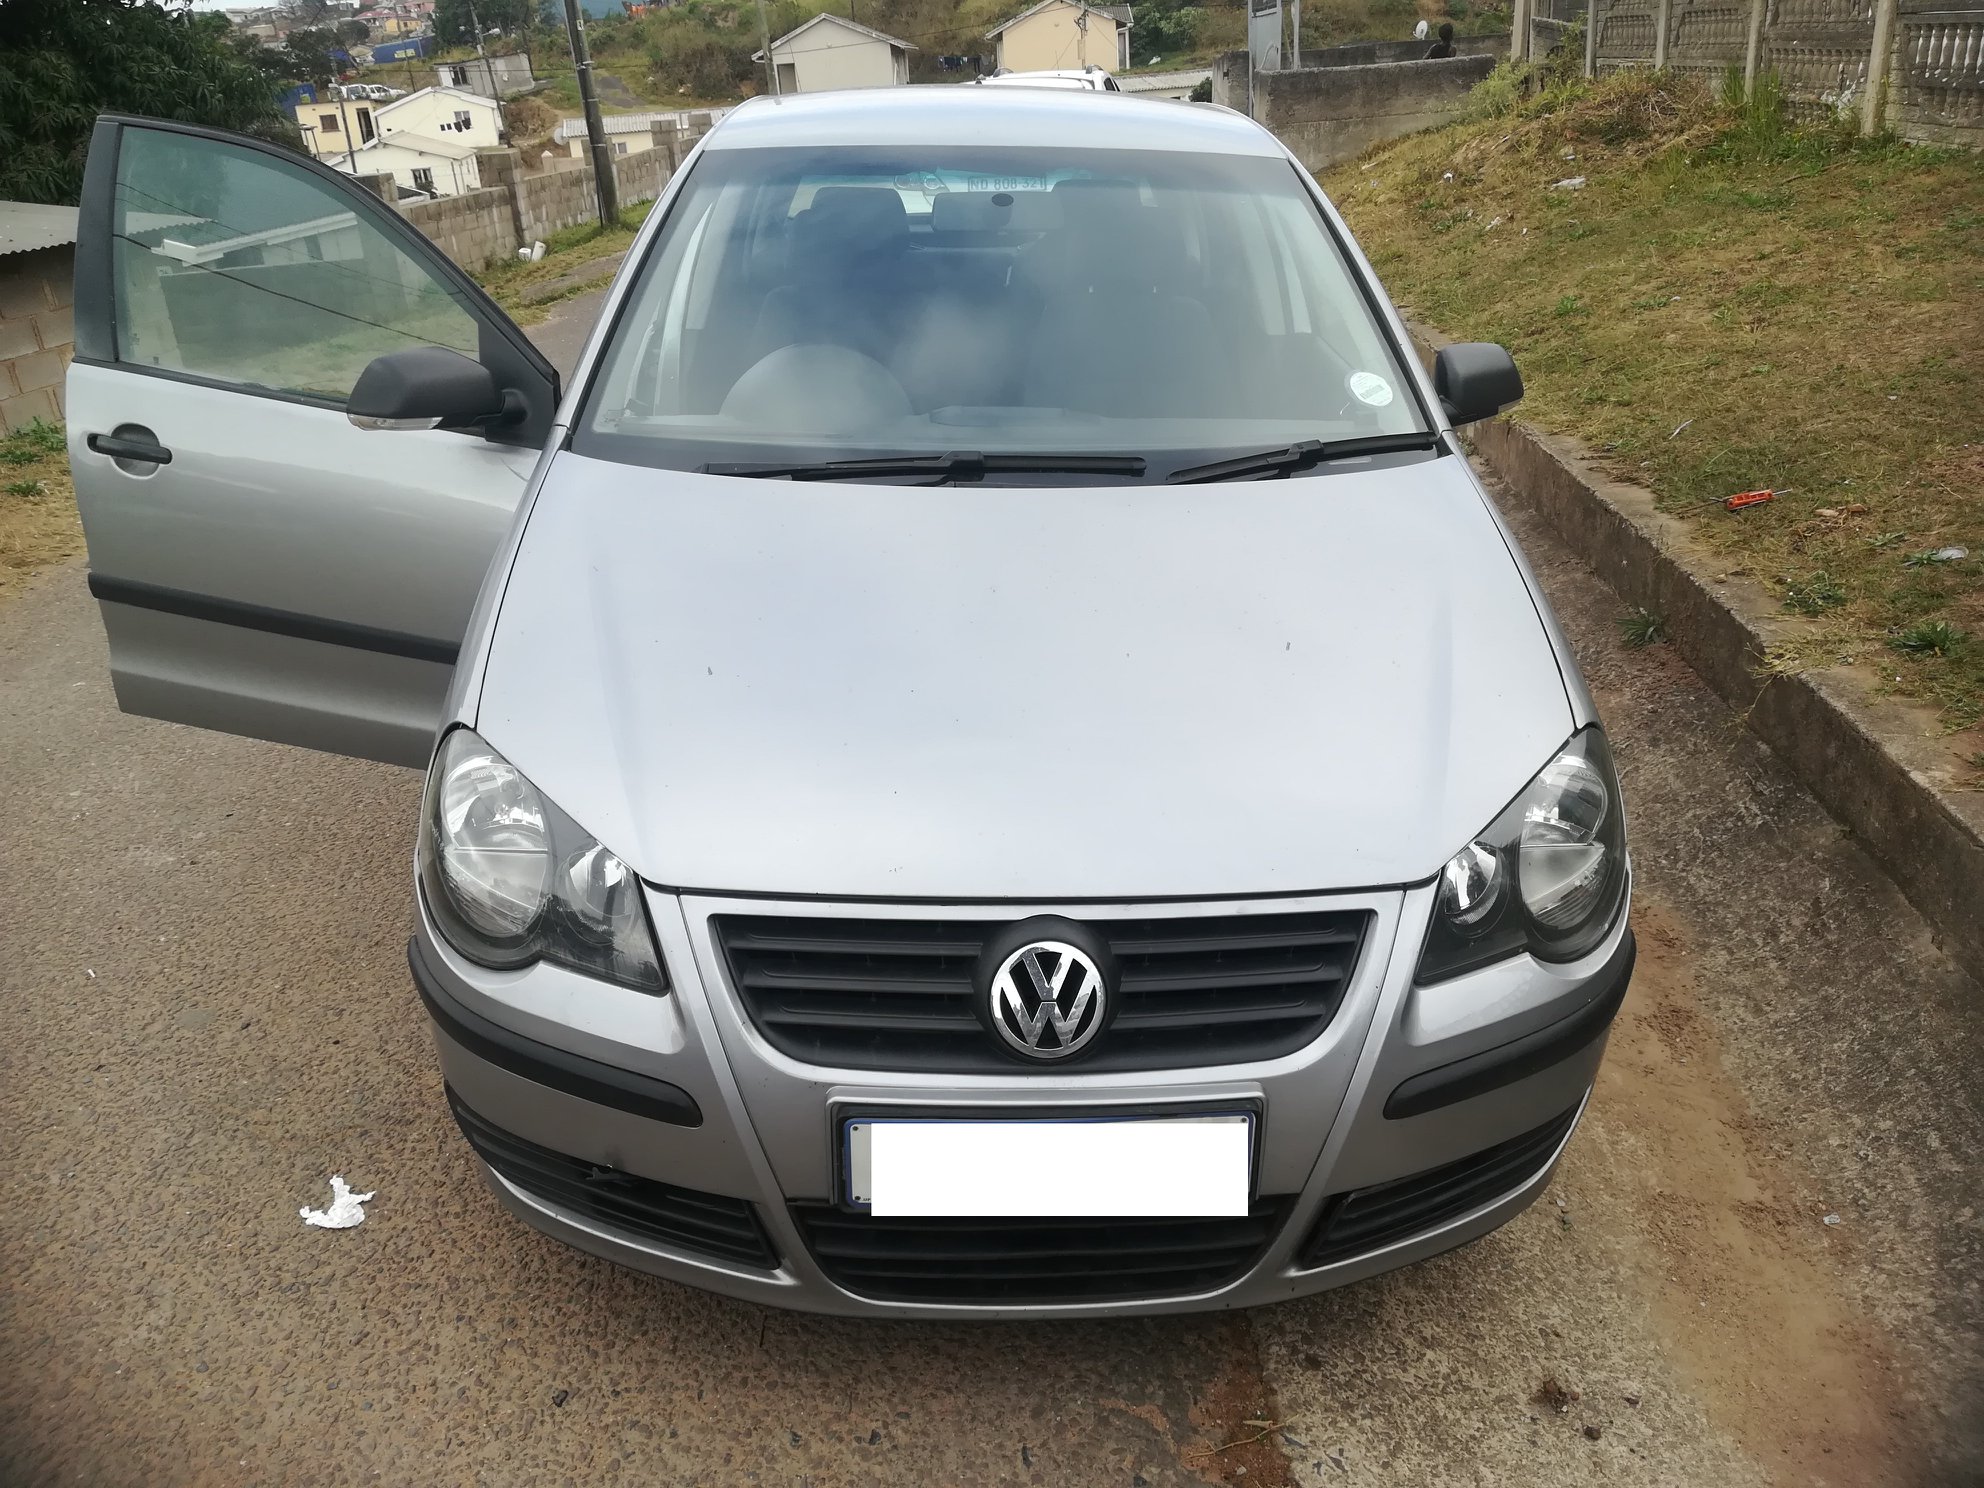 Stolen Volkswagen Polo from Westridge recovered in Umlazi A section